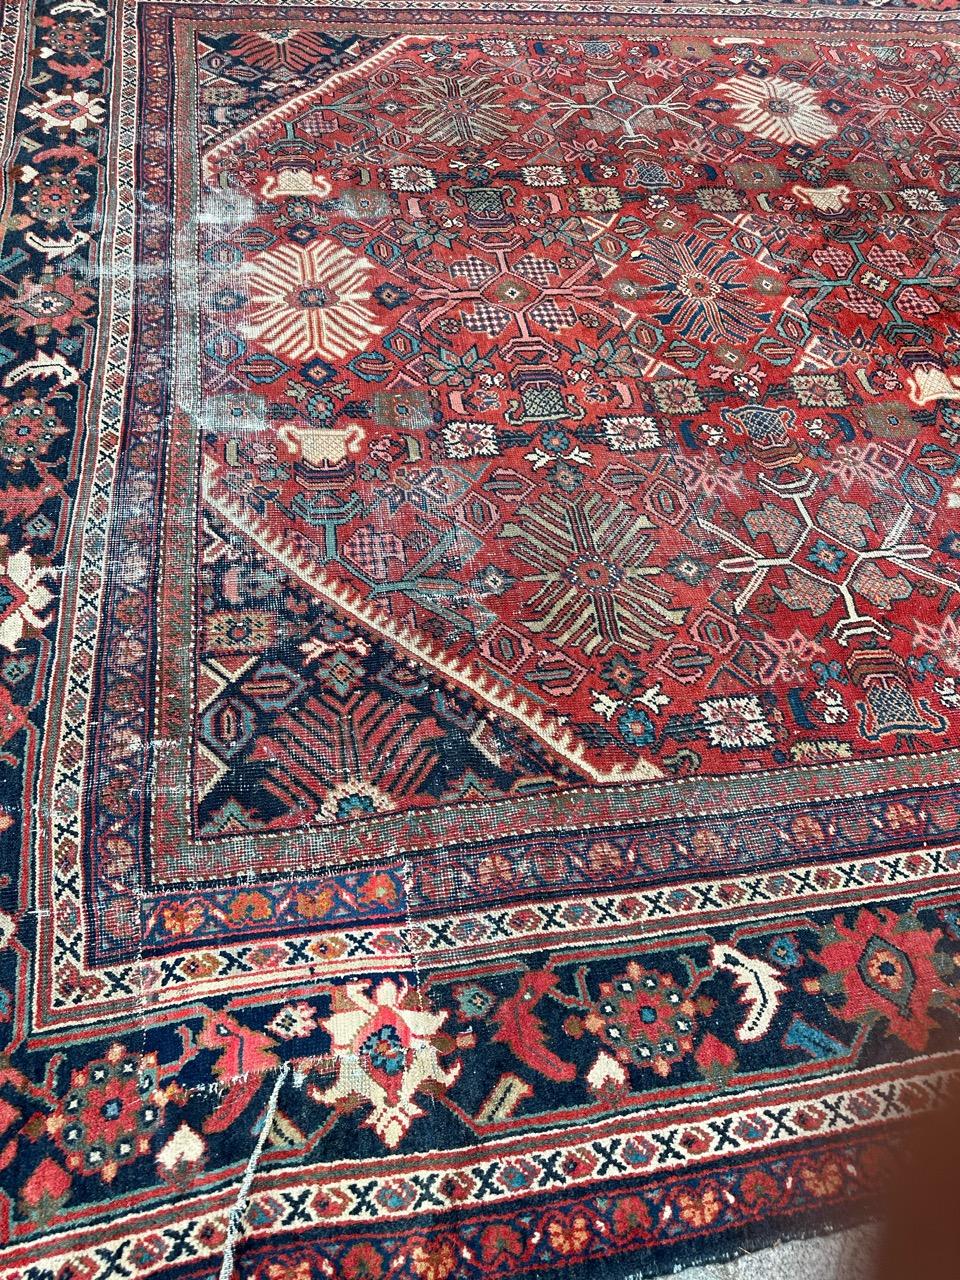 Presenting a remarkable late 19th-century mahal rug, adorned with exquisite decorative designs and captivating natural colors. This stunning piece, entirely hand-knotted with wool velvet on a cotton foundation, carries with it the rich history of